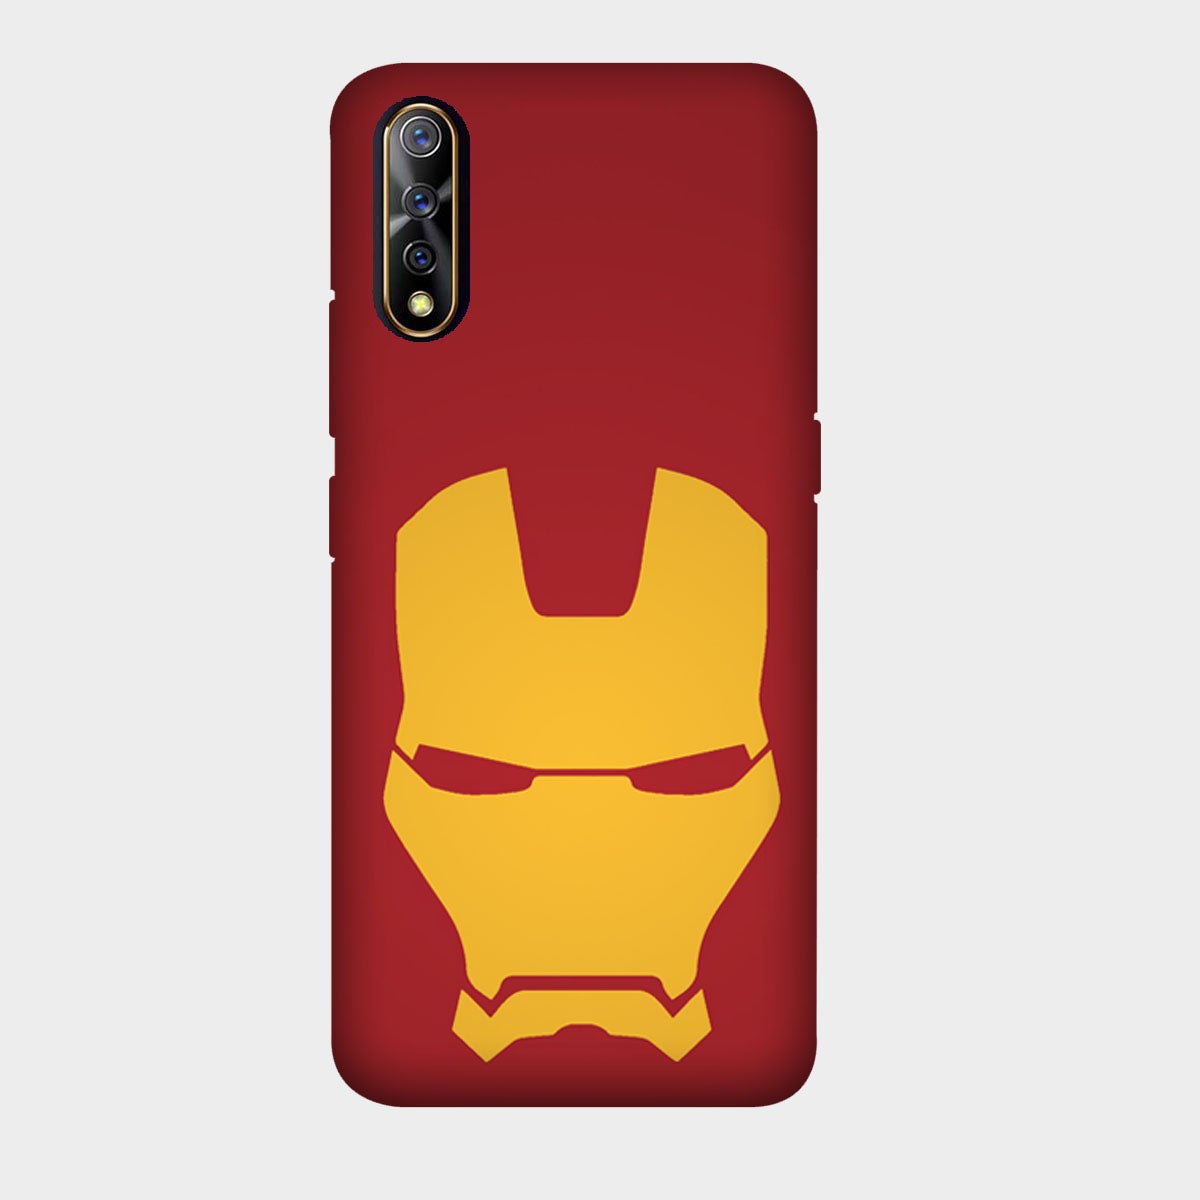 Iron Man - Red - Mobile Phone Cover - Hard Case - Vivo